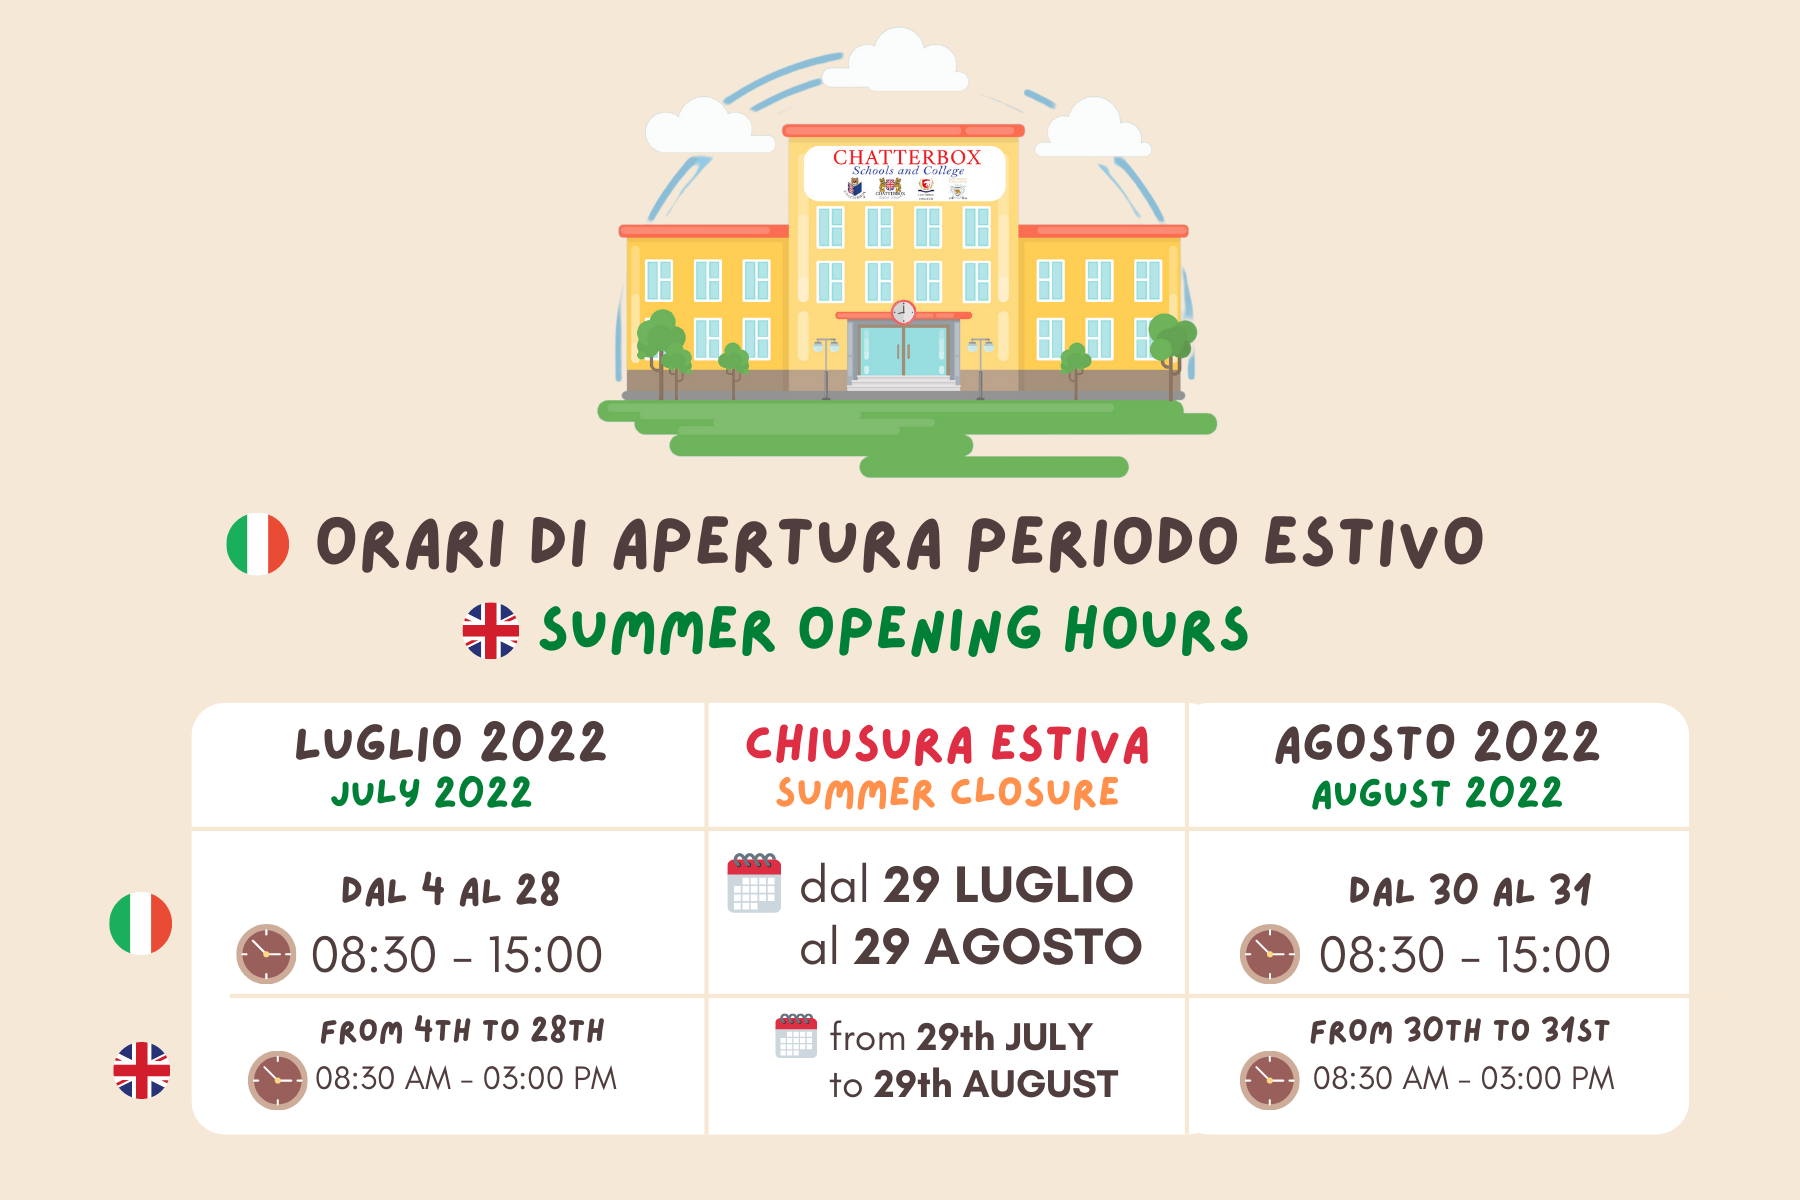 office opening hours (600 × 400 px) (1)